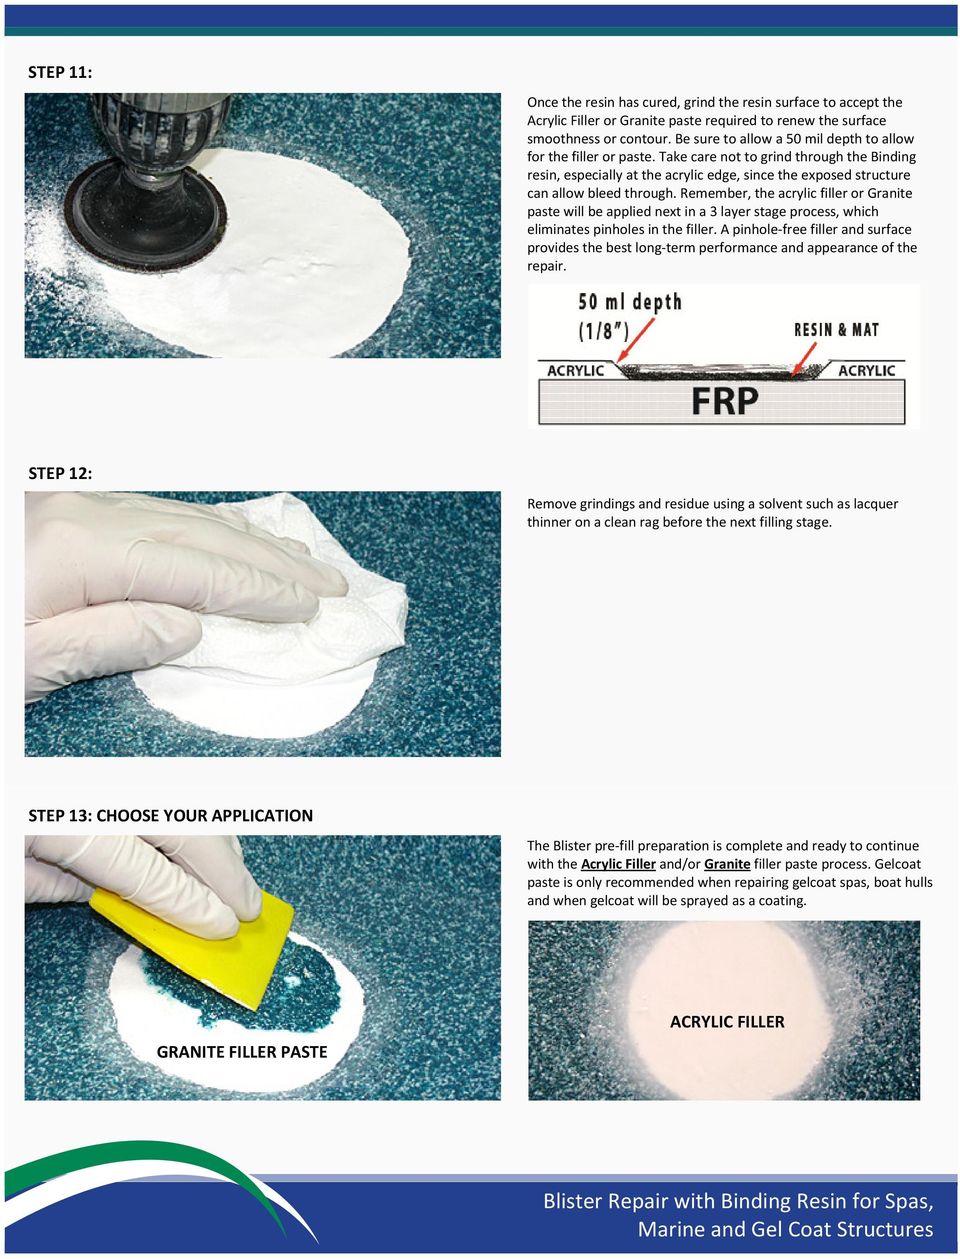 Remember, the acrylic filler or Granite paste will be applied next in a 3 layer stage process, which eliminates pinholes in the filler.